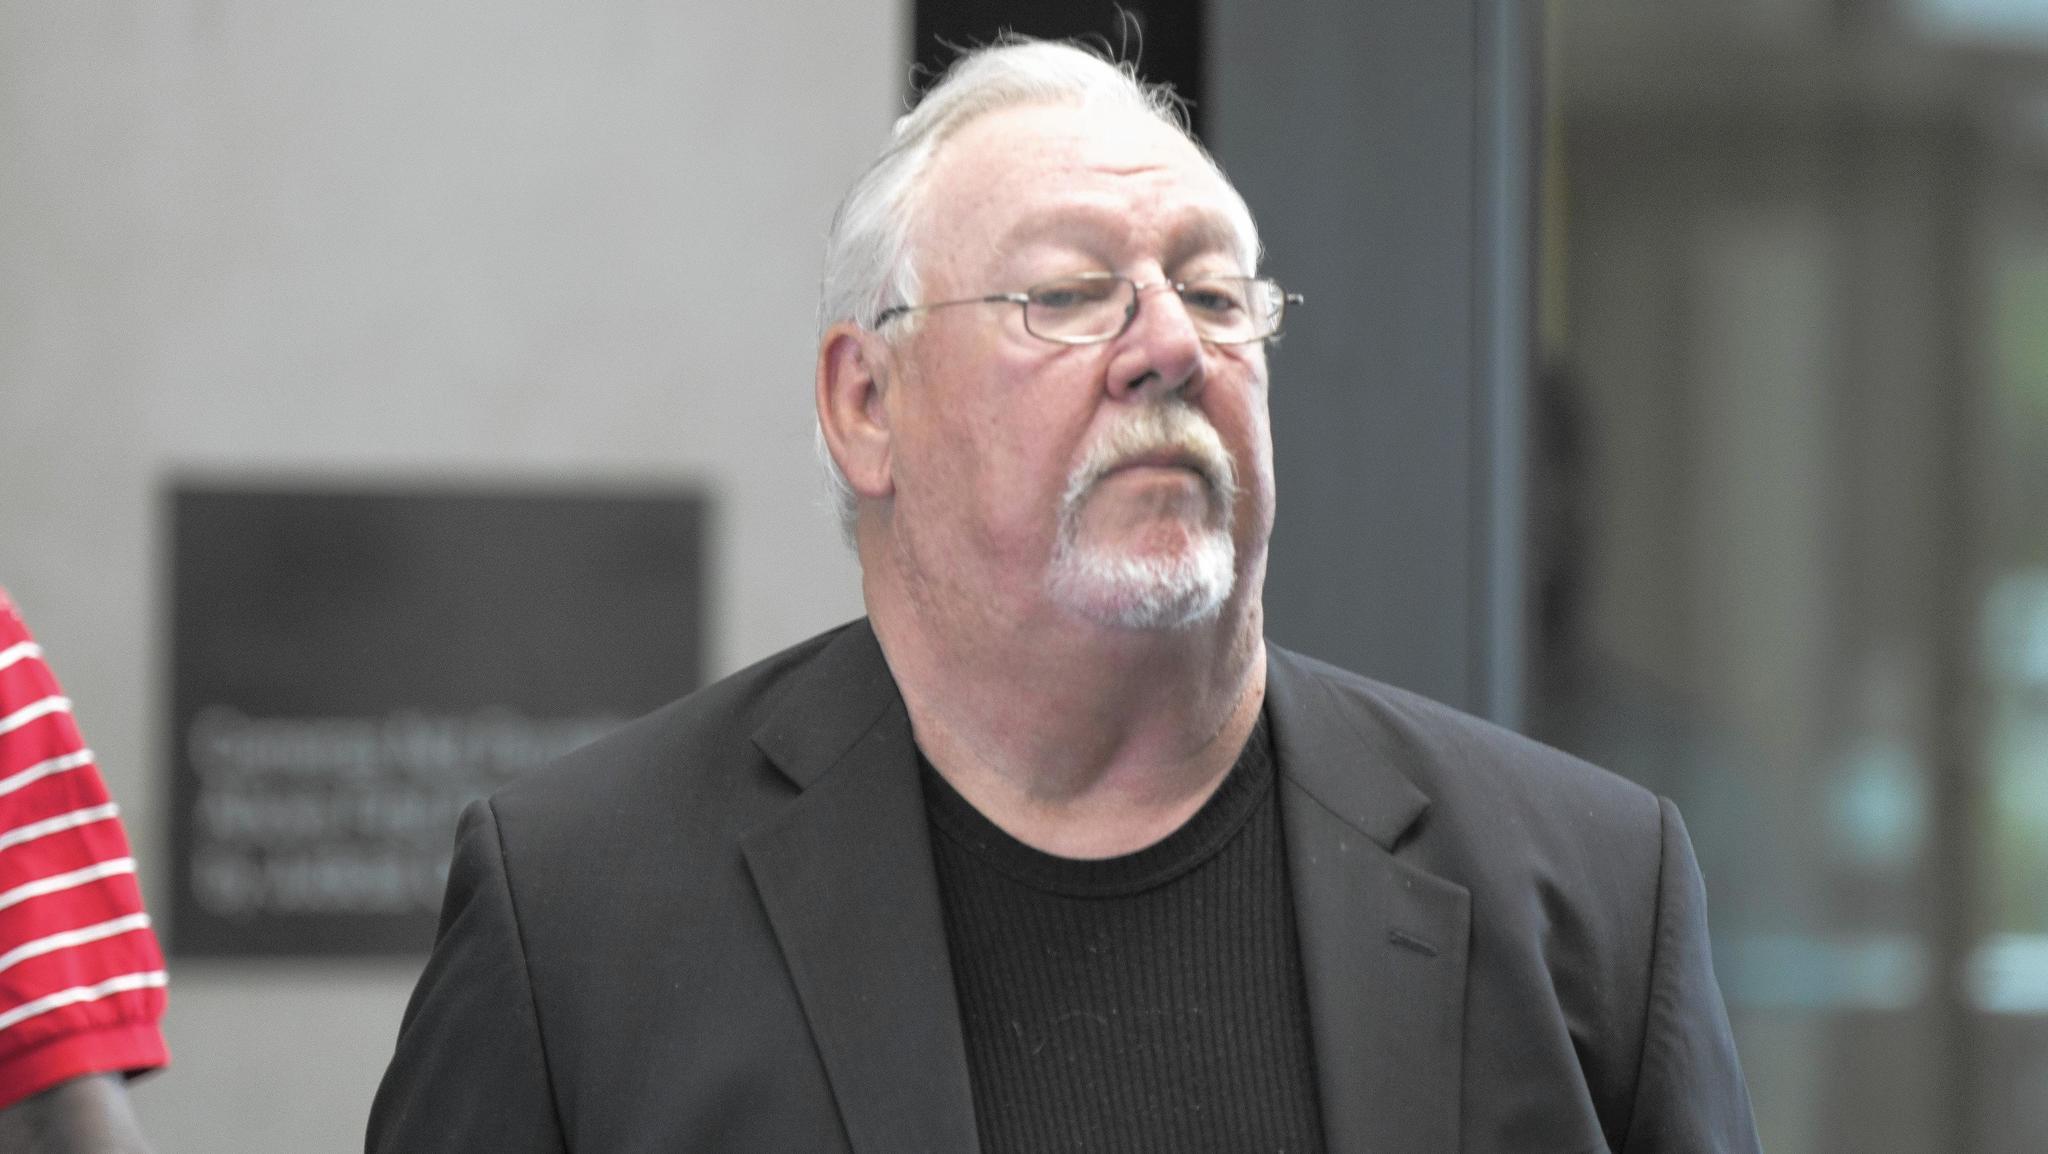 Months after resigning, ex-top cop of Hometown was quietly charged with pocketing towing fees